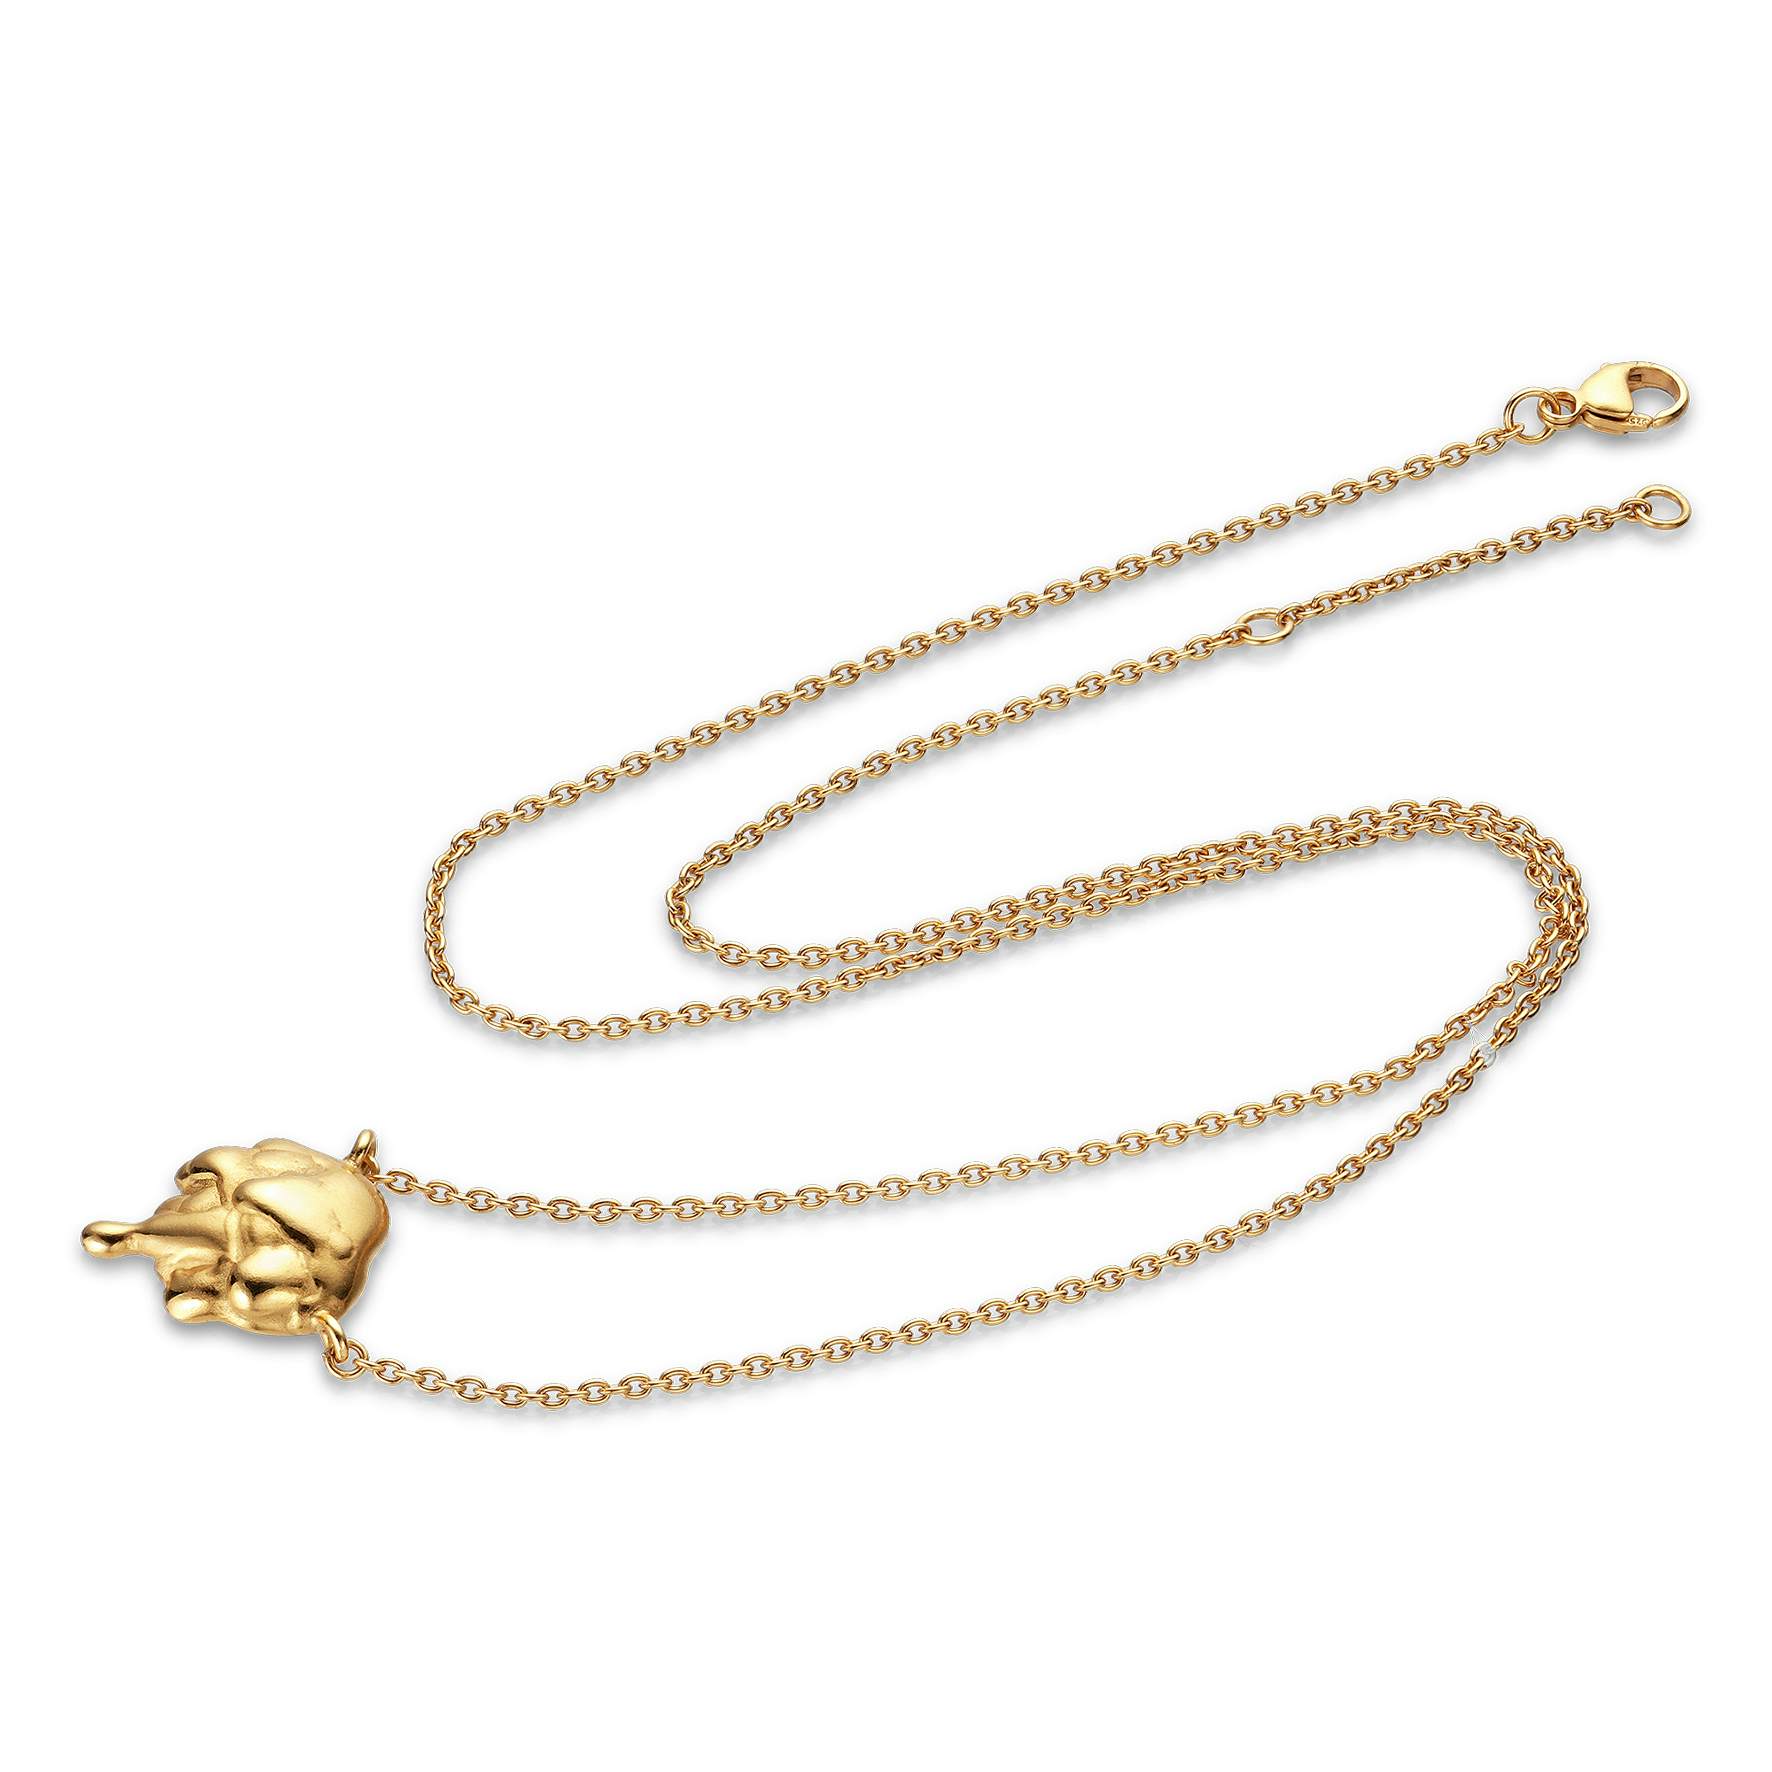 Drippy Necklace from Jane Kønig in Goldplated-Silver Sterling 925